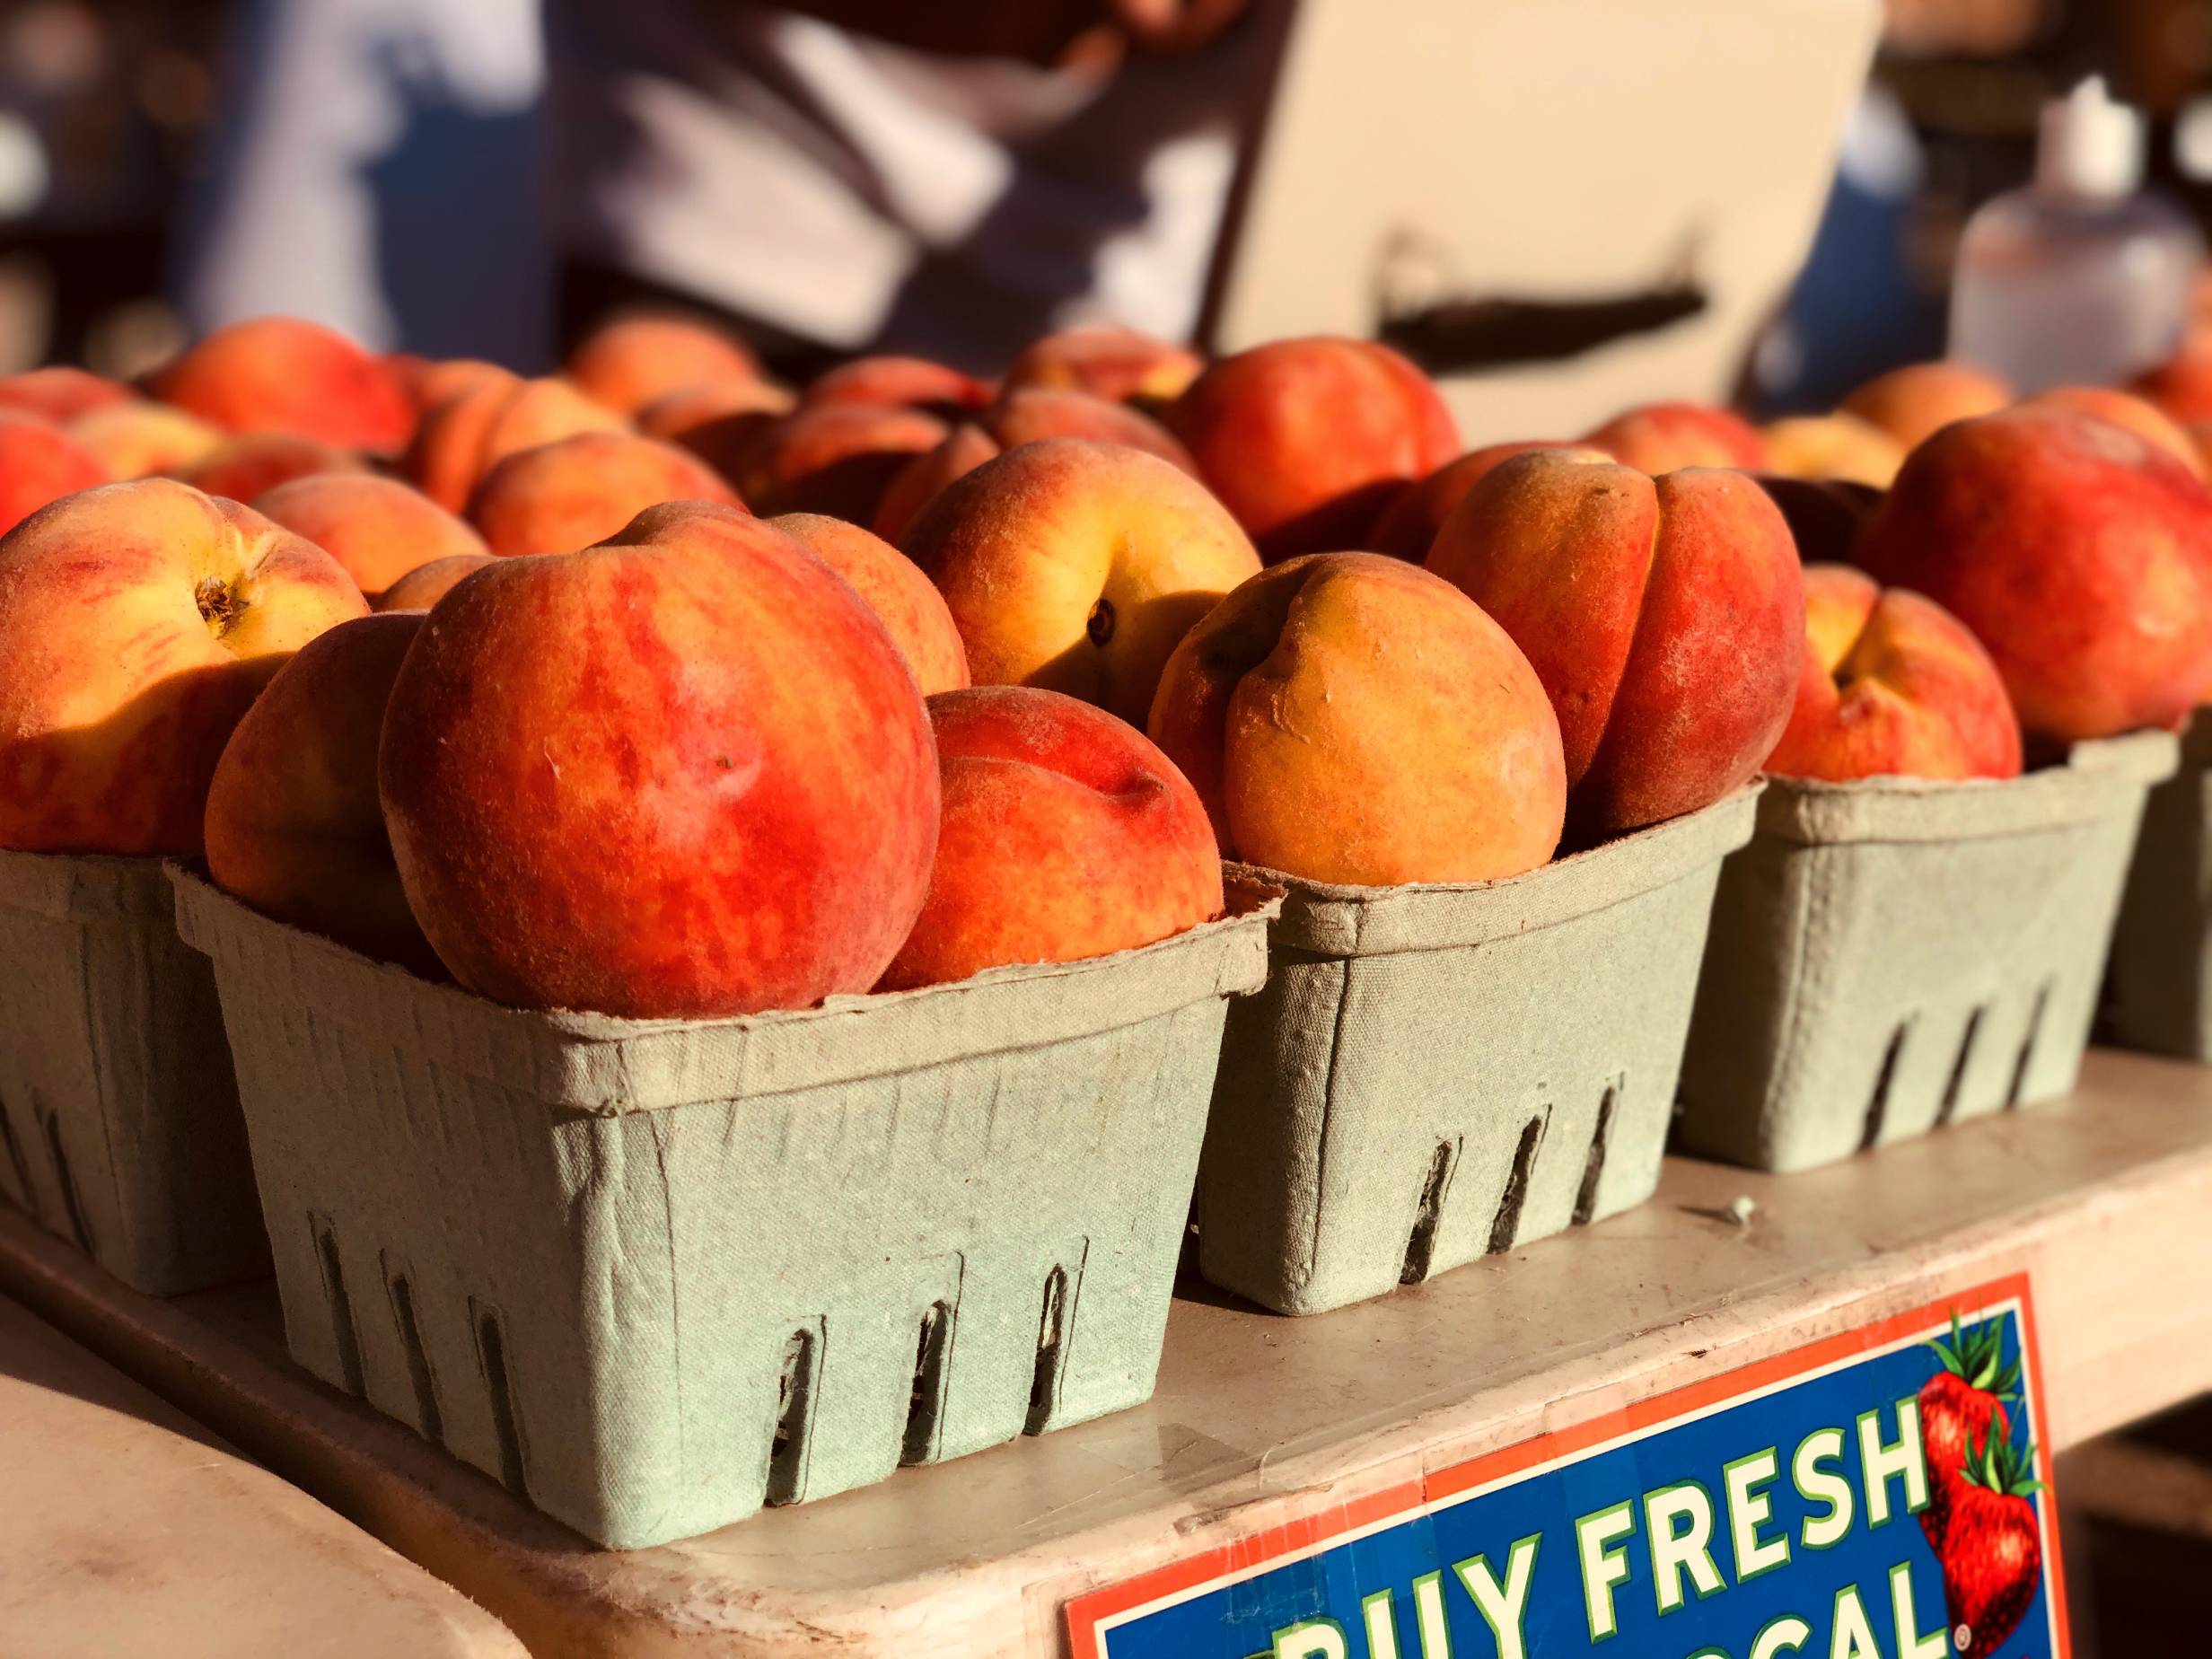 Small square baskets filled and overflowing with ripe orange peaches. Photo by Alyssa Buckley.